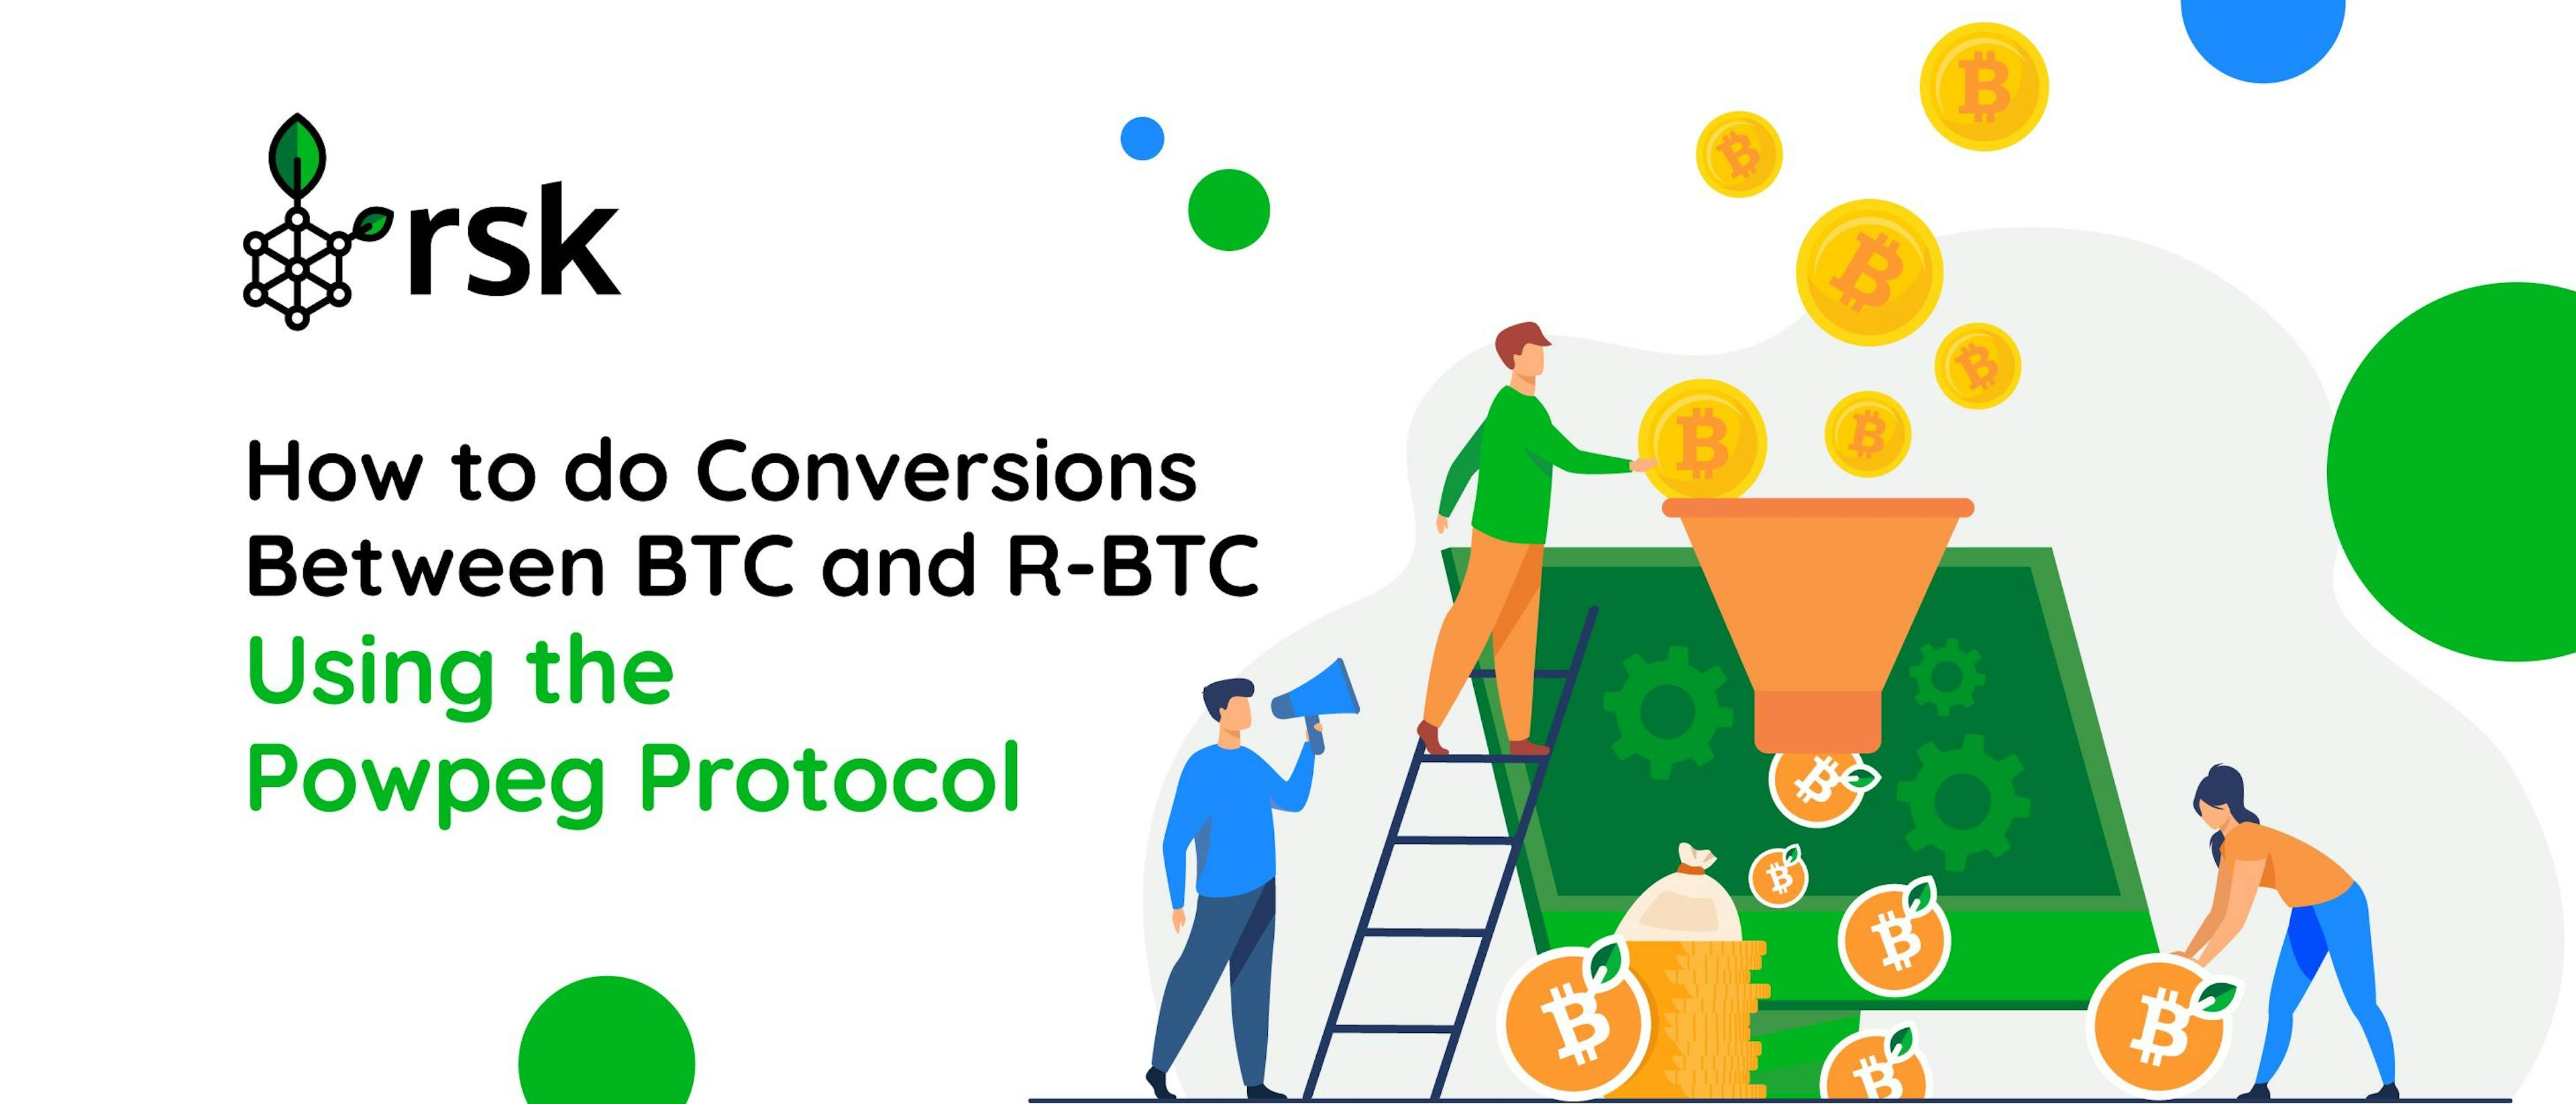 featured image - How to do Conversions Between BTC and R-BTC Using the Powpeg Protocol